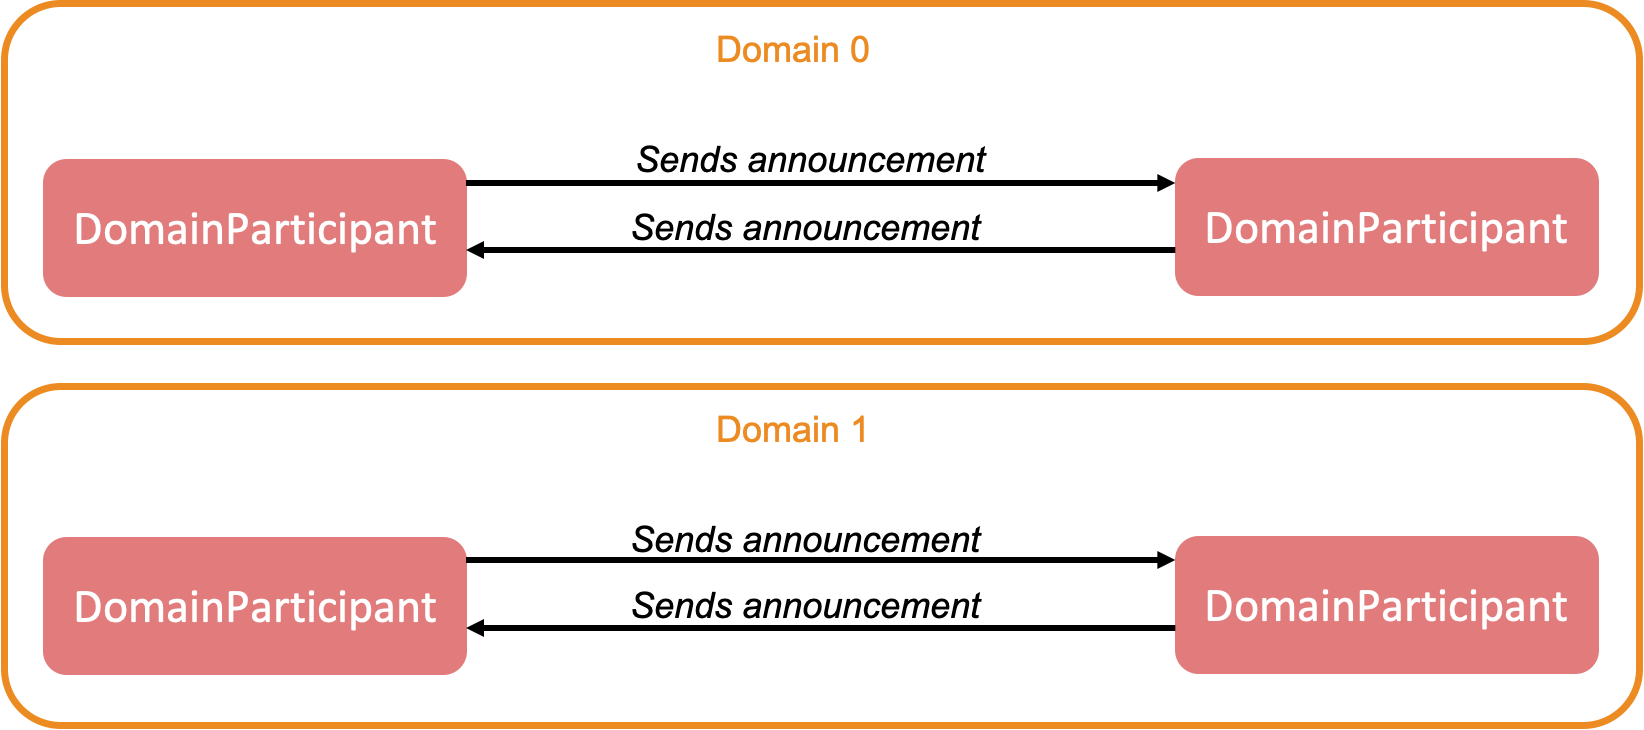 DomainParticipants in Different Domains